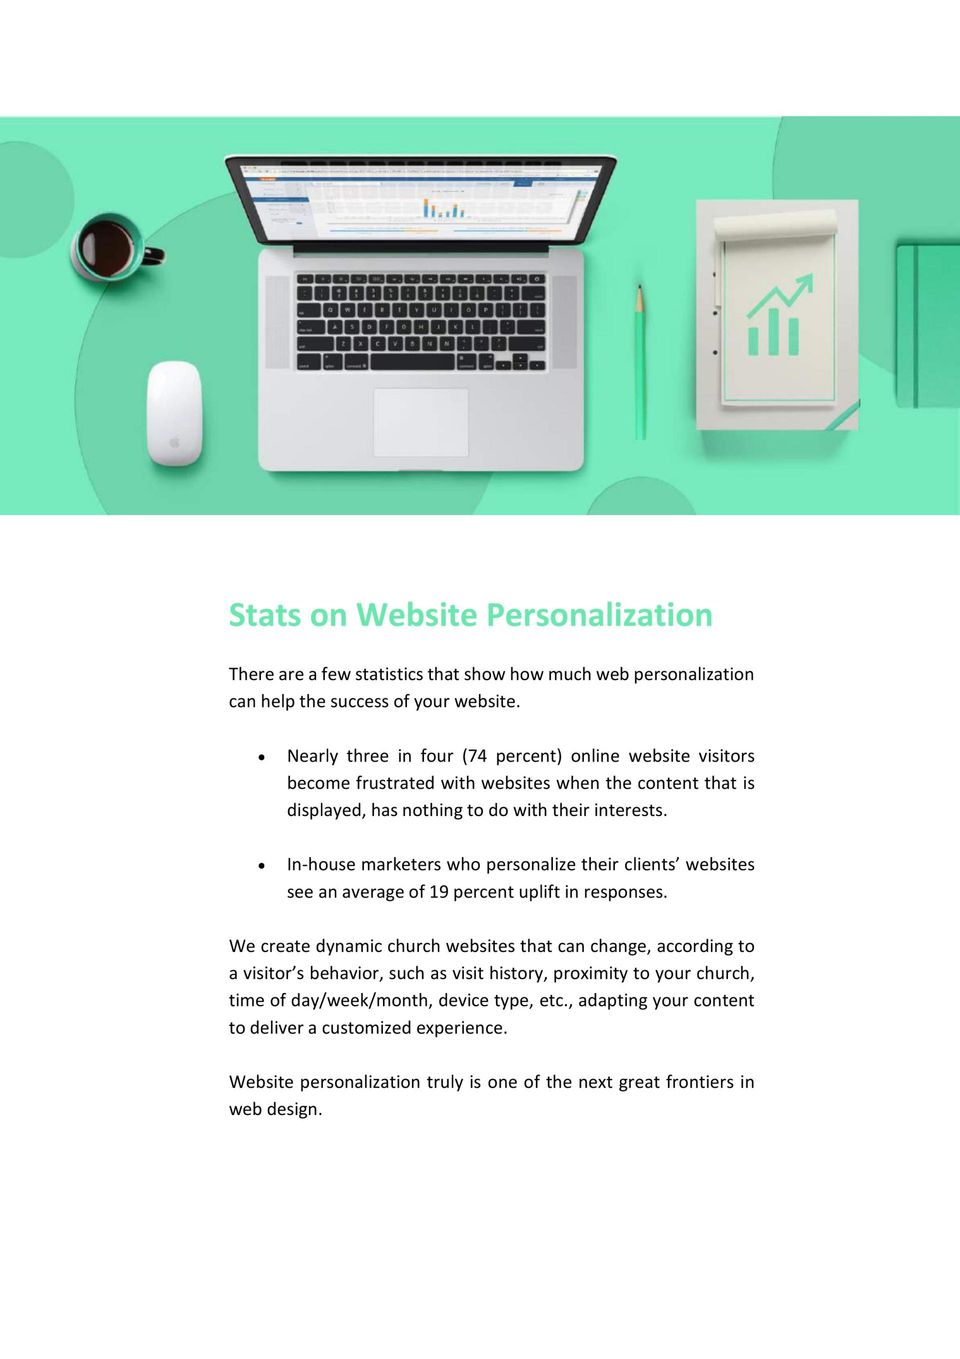 Why Update? Stats on website personalization